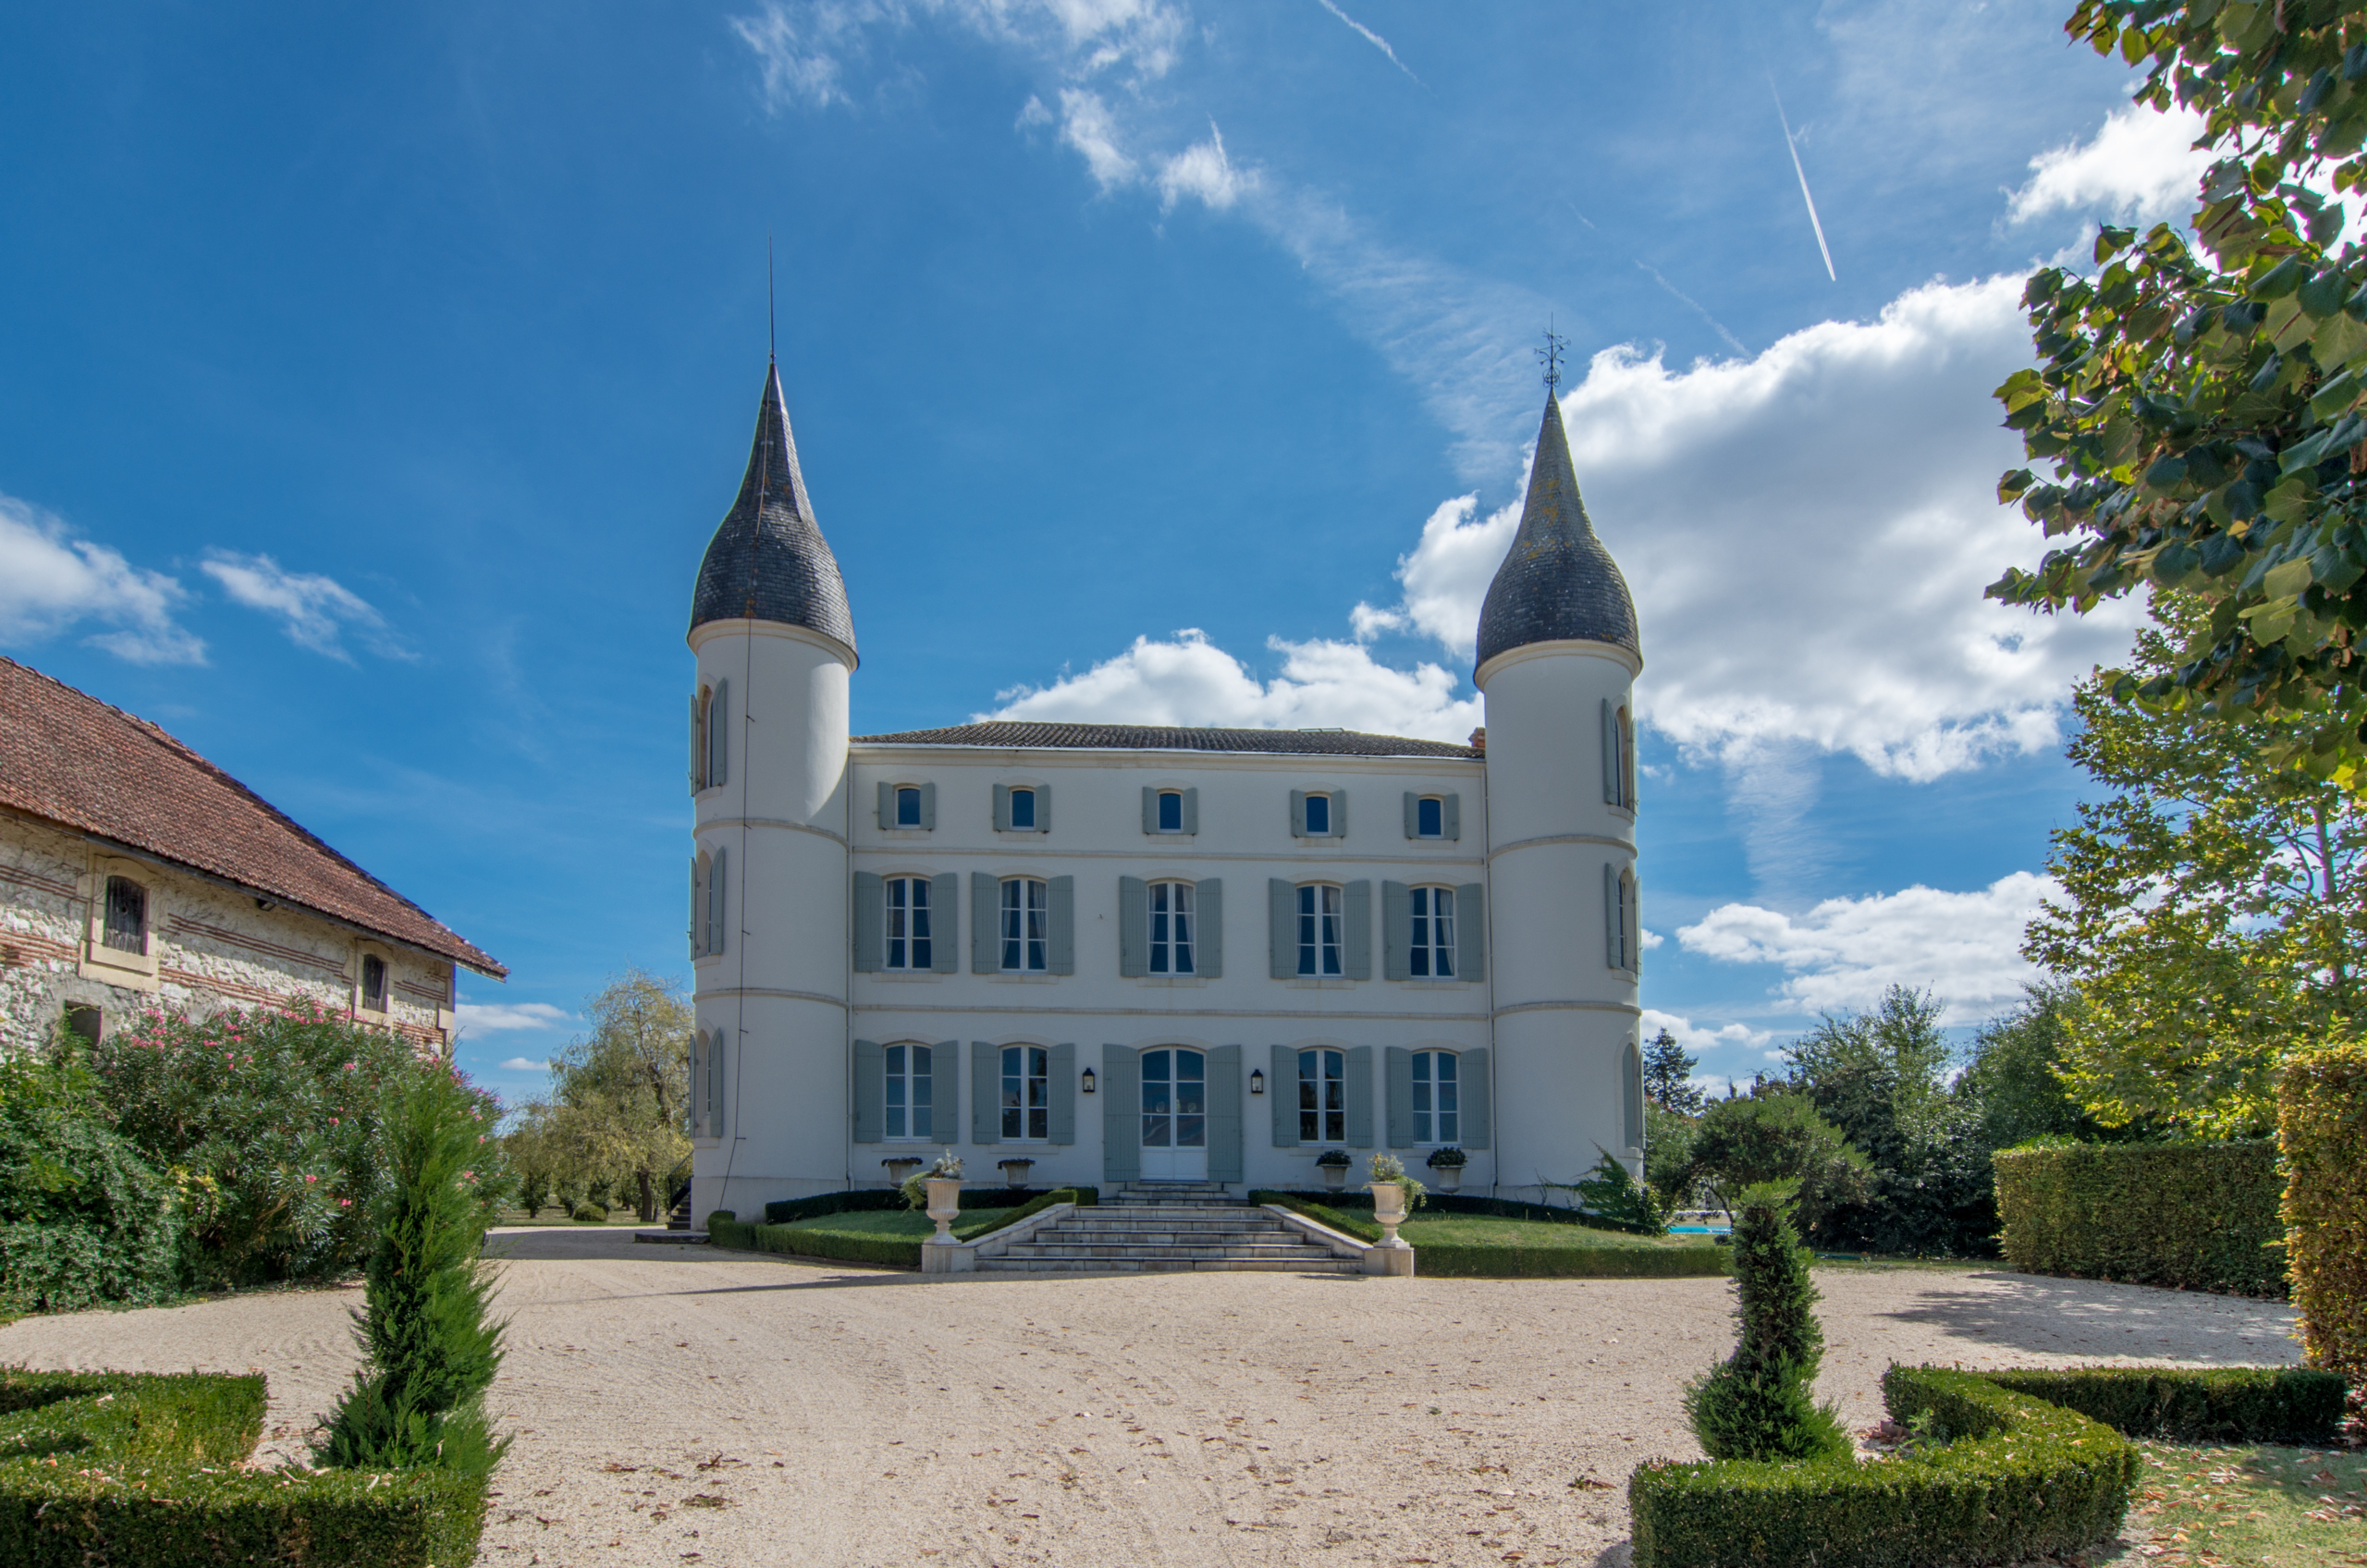 Front view of white fairytale chateau with two towers